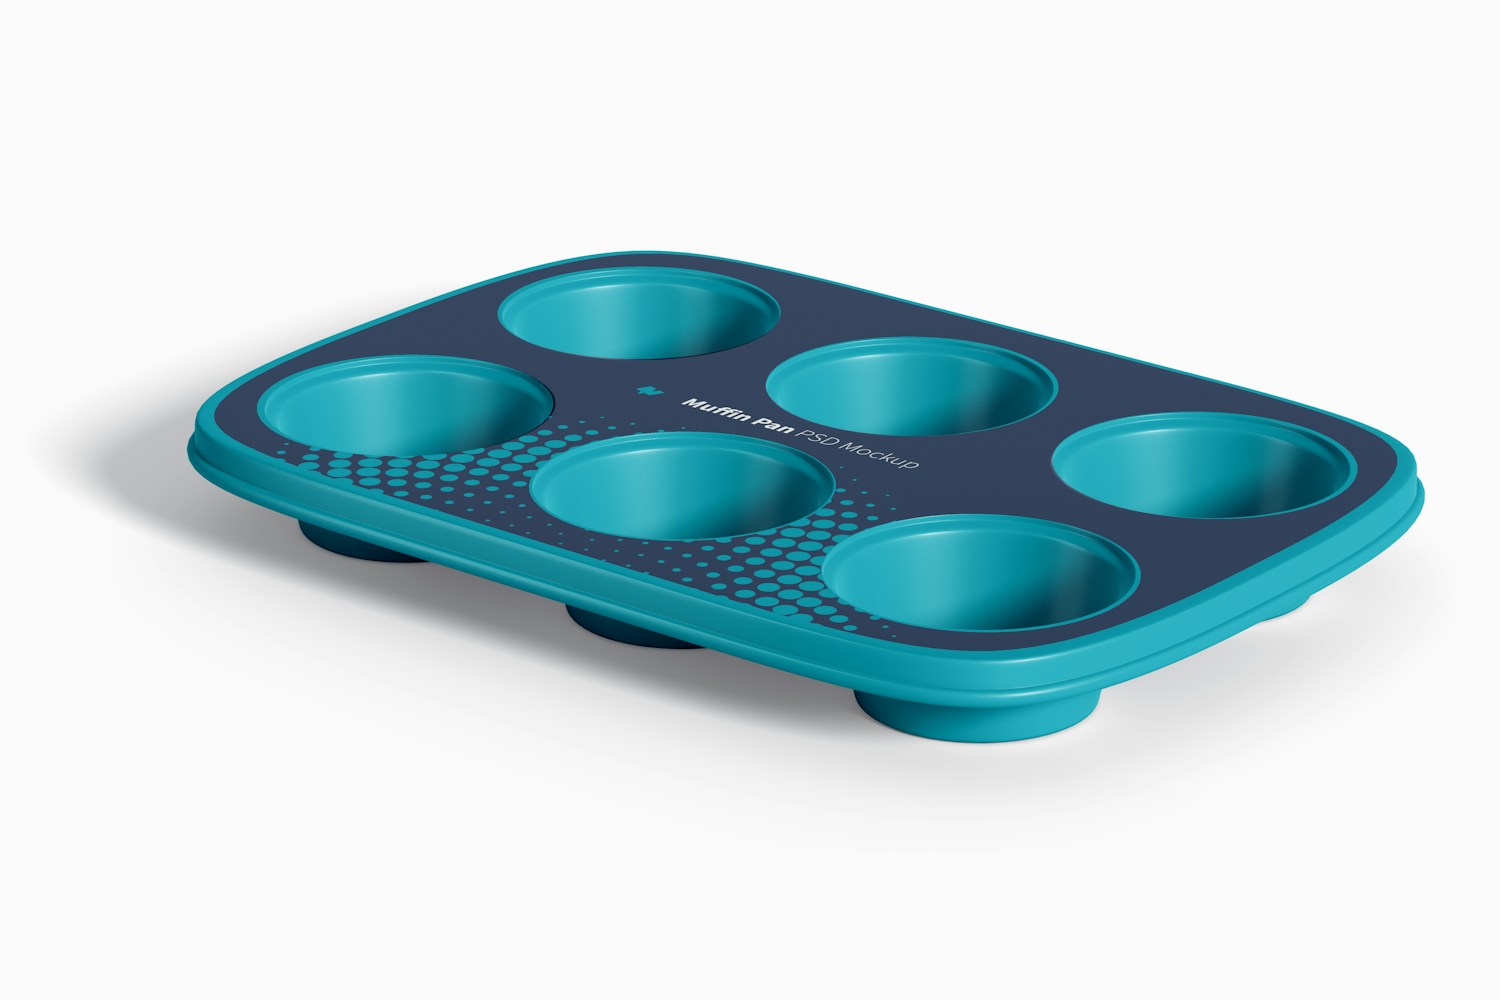 Muffin Pan Mockup, Perspective View